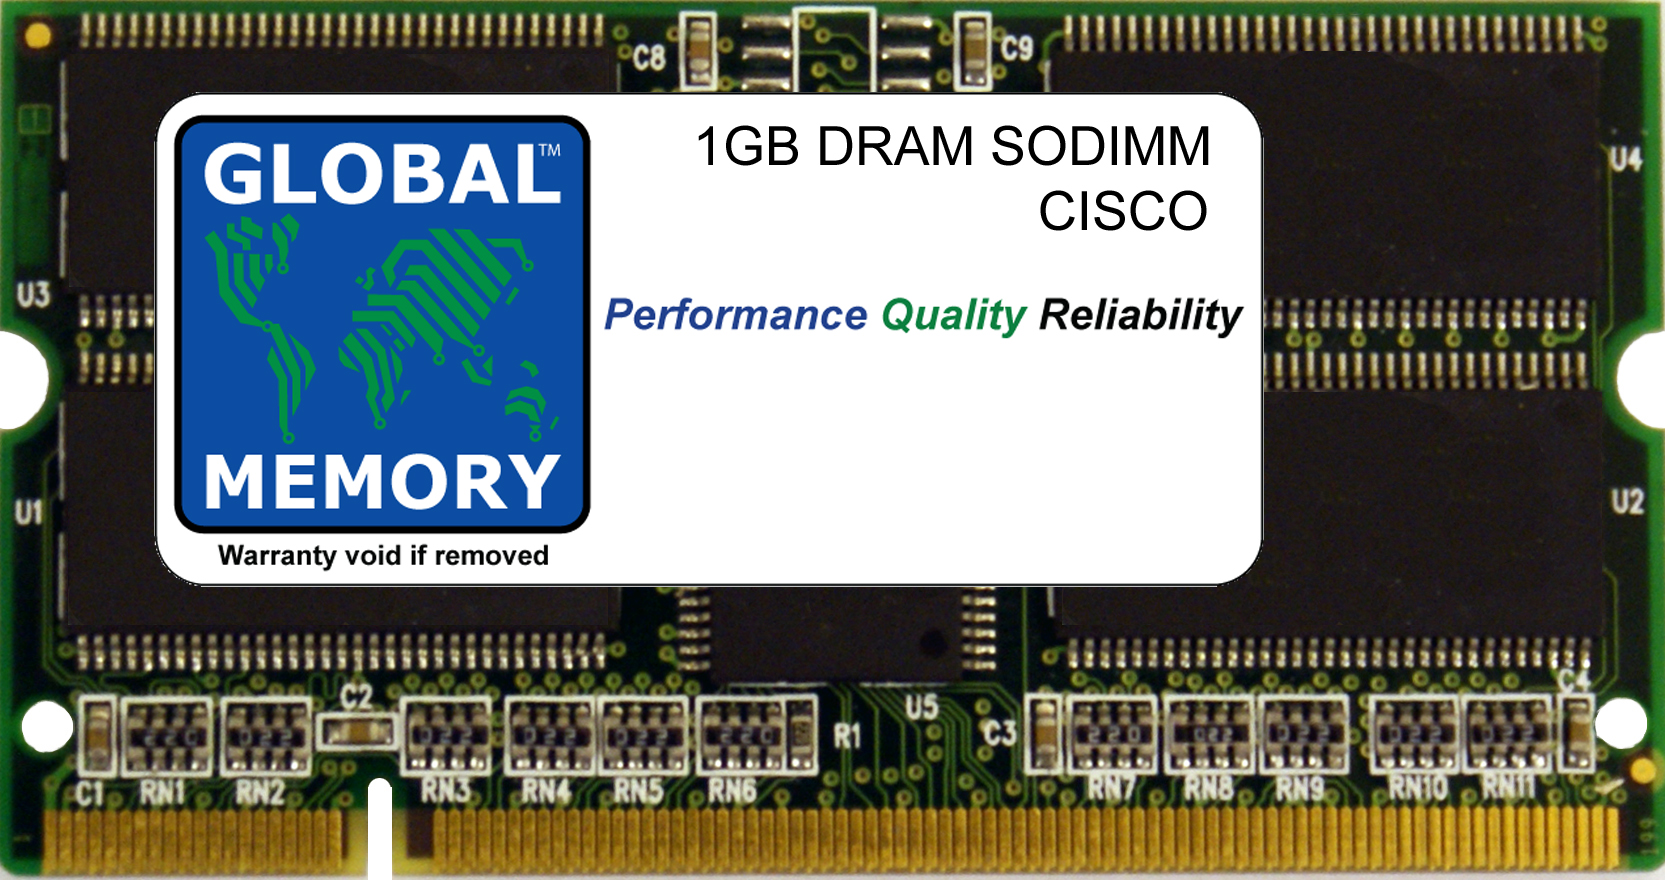 1GB DRAM SODIMM MEMORY RAM FOR CISCO CATALYST 6500 SERIES SWITCHES DISTRIBUTED FORWARDING CARD 3A (MEM-XCEF720-1GB) - Click Image to Close